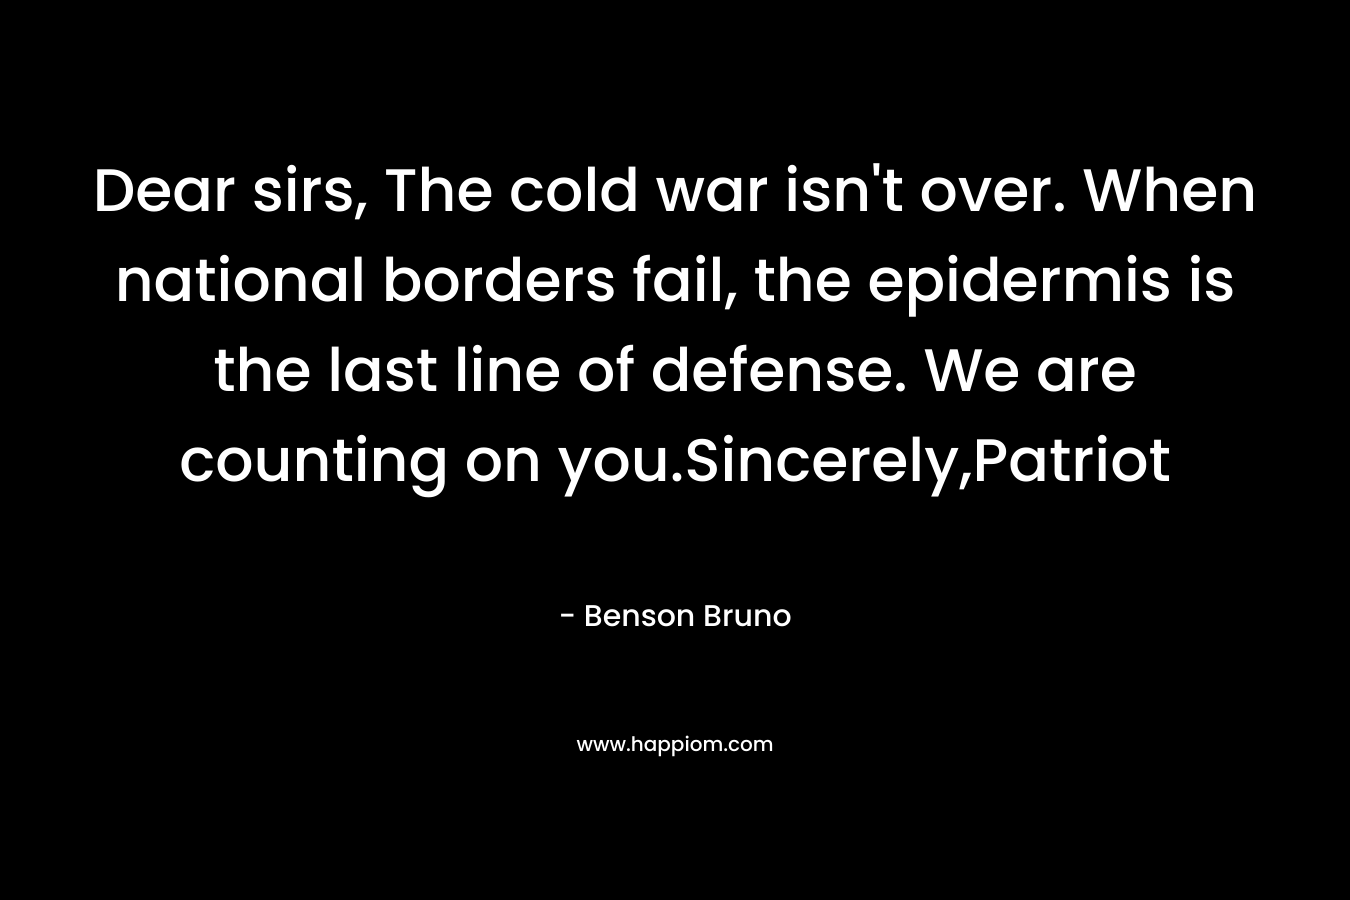 Dear sirs, The cold war isn’t over. When national borders fail, the epidermis is the last line of defense. We are counting on you.Sincerely,Patriot – Benson Bruno